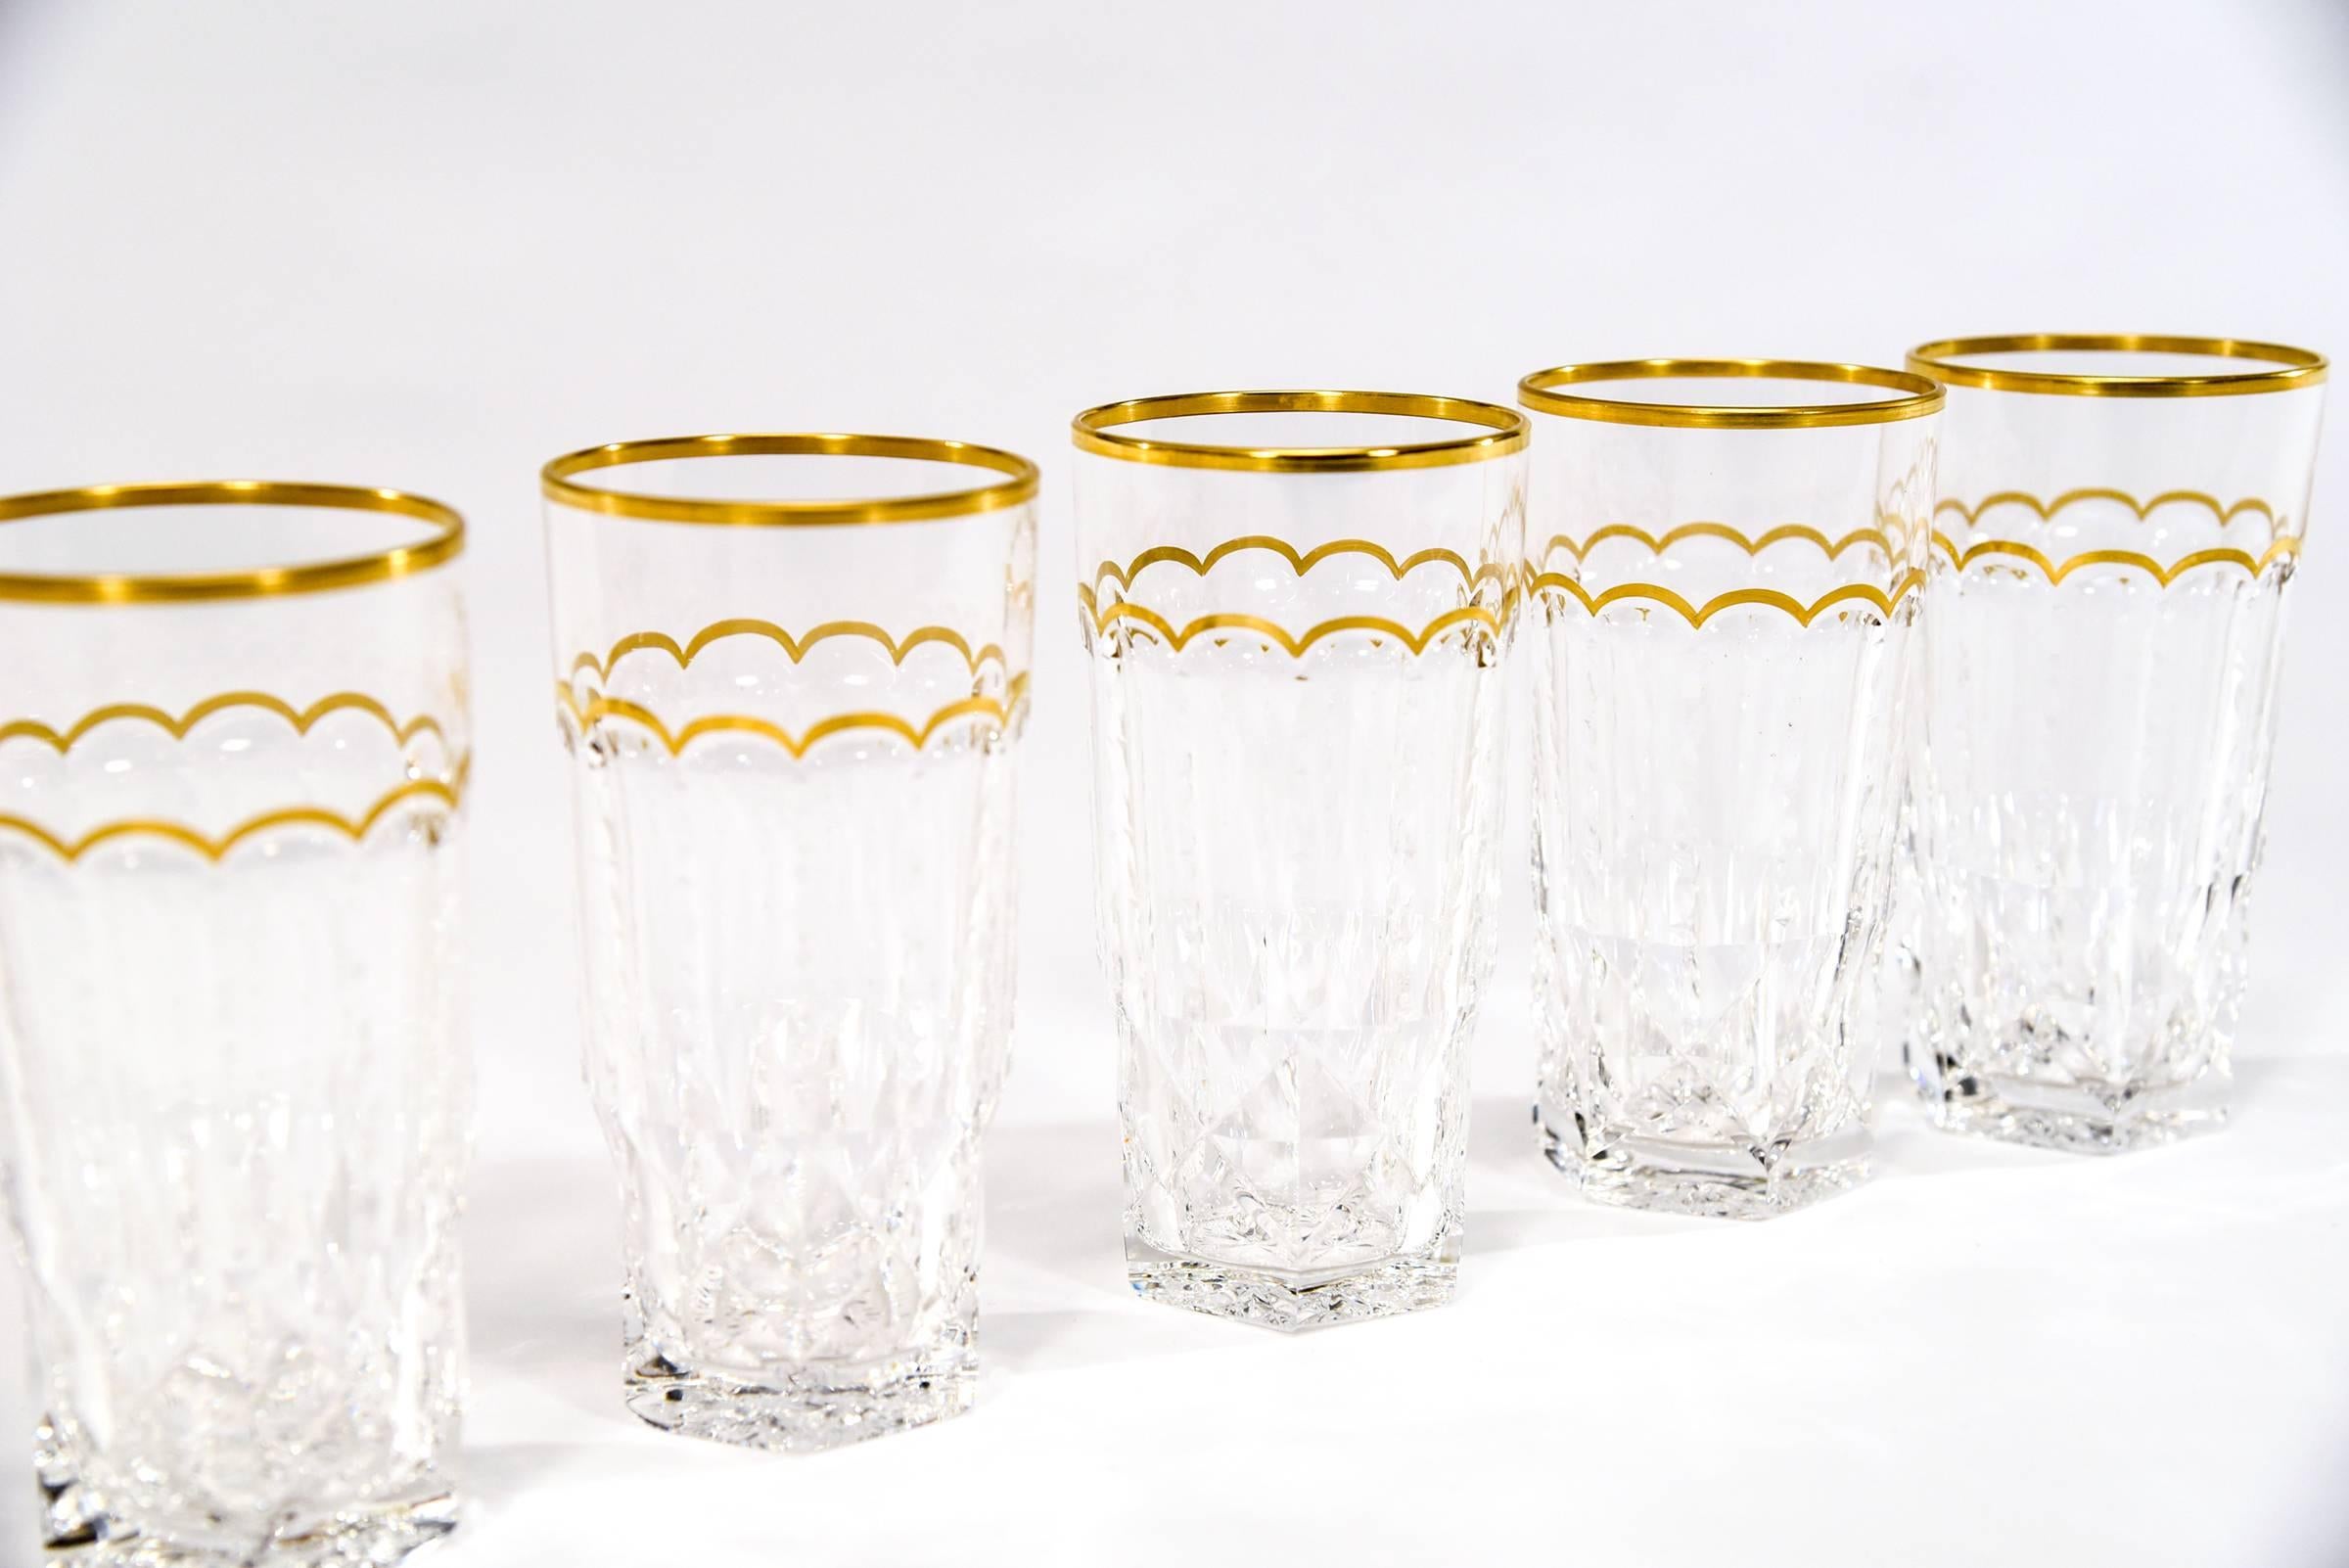 This set of 13 signed St. Louis tumblers or highballs, are sure to be the ones you reach for when setting the table or pouring your favorite drink. The handblown crystal sparkles with the complex hexagonal cut base and sides, topped off with a